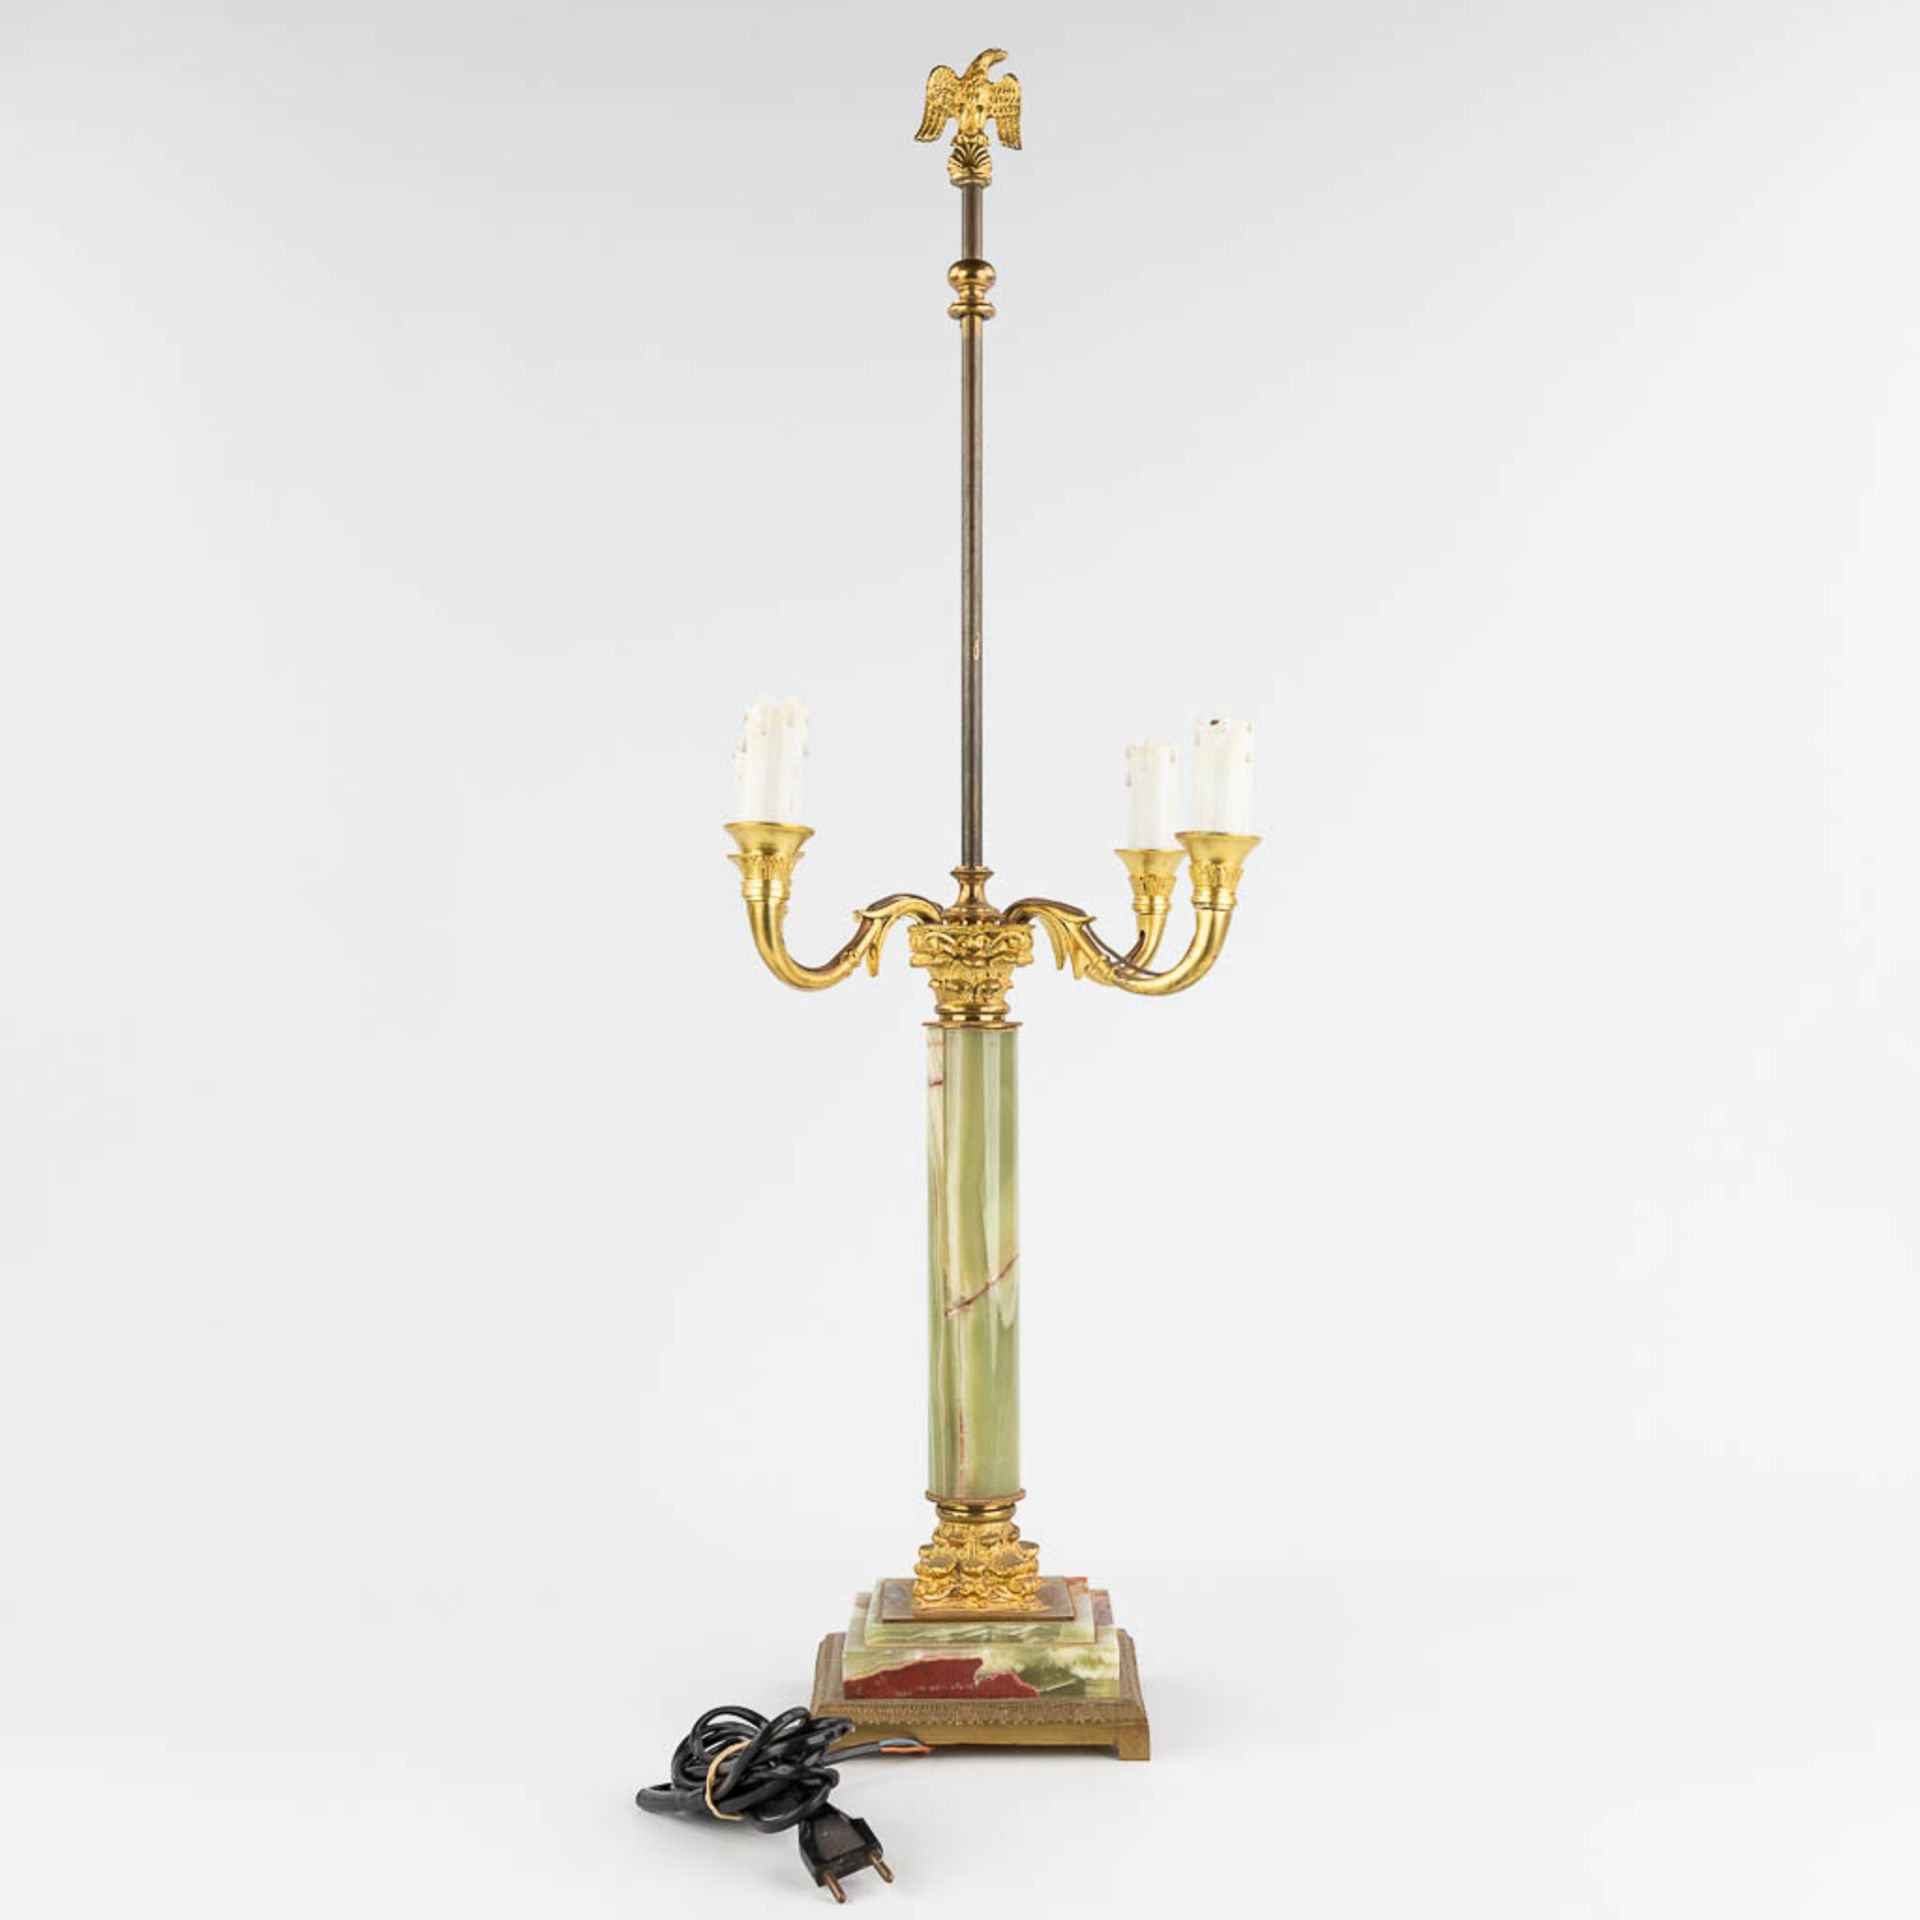 A table lamp, brass and onyx. 20th century. (L: 30 x W: 30 x H: 77 cm) - Image 5 of 13